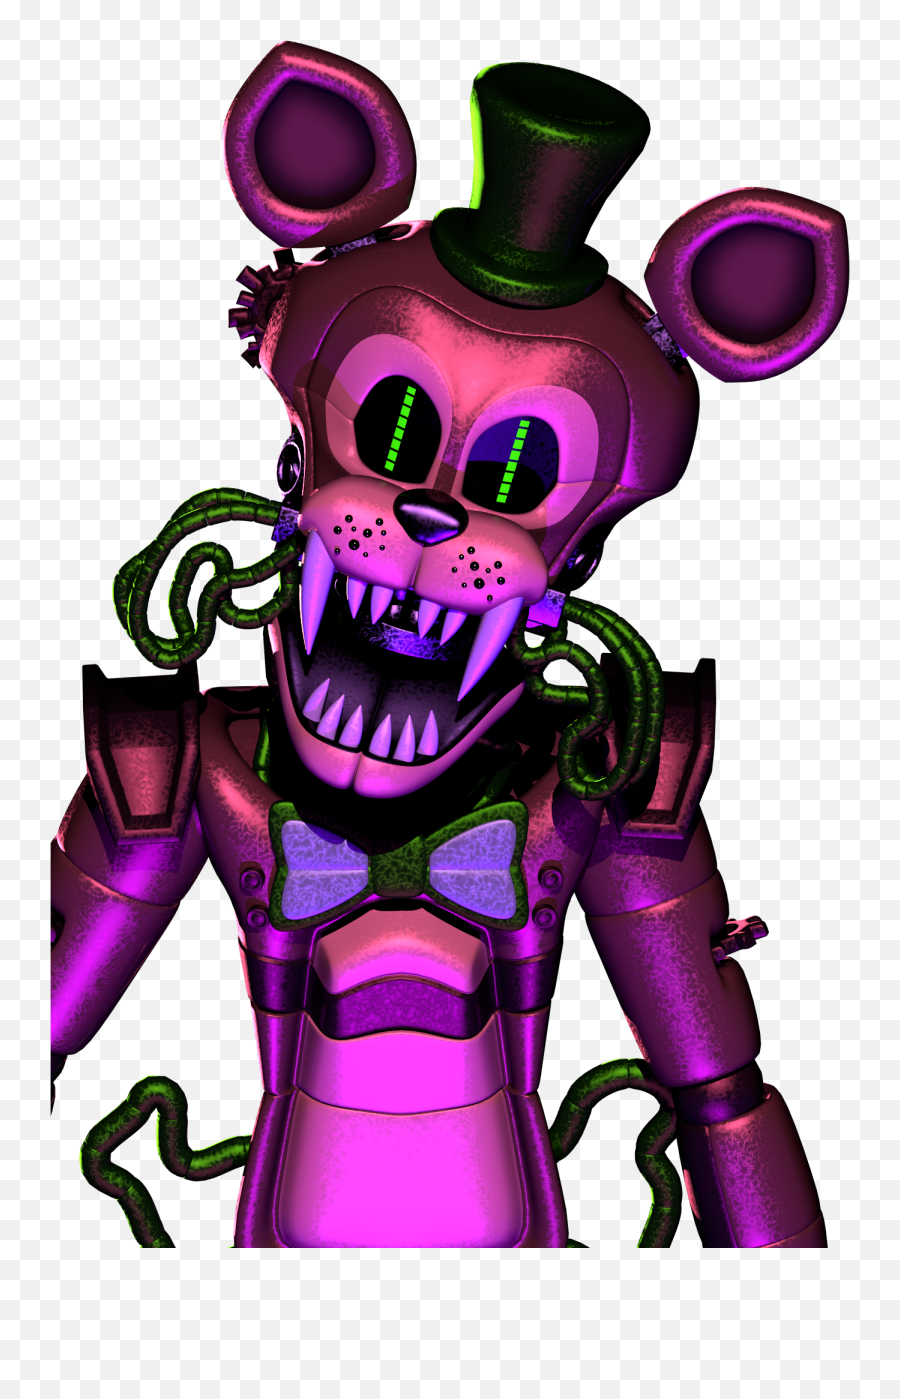 Fangamedreamcatcher Popgoes By Jc - Popgoes 2 Dream Catcher Fnaf Fan Game Characters Png,Dreamcatcher Png